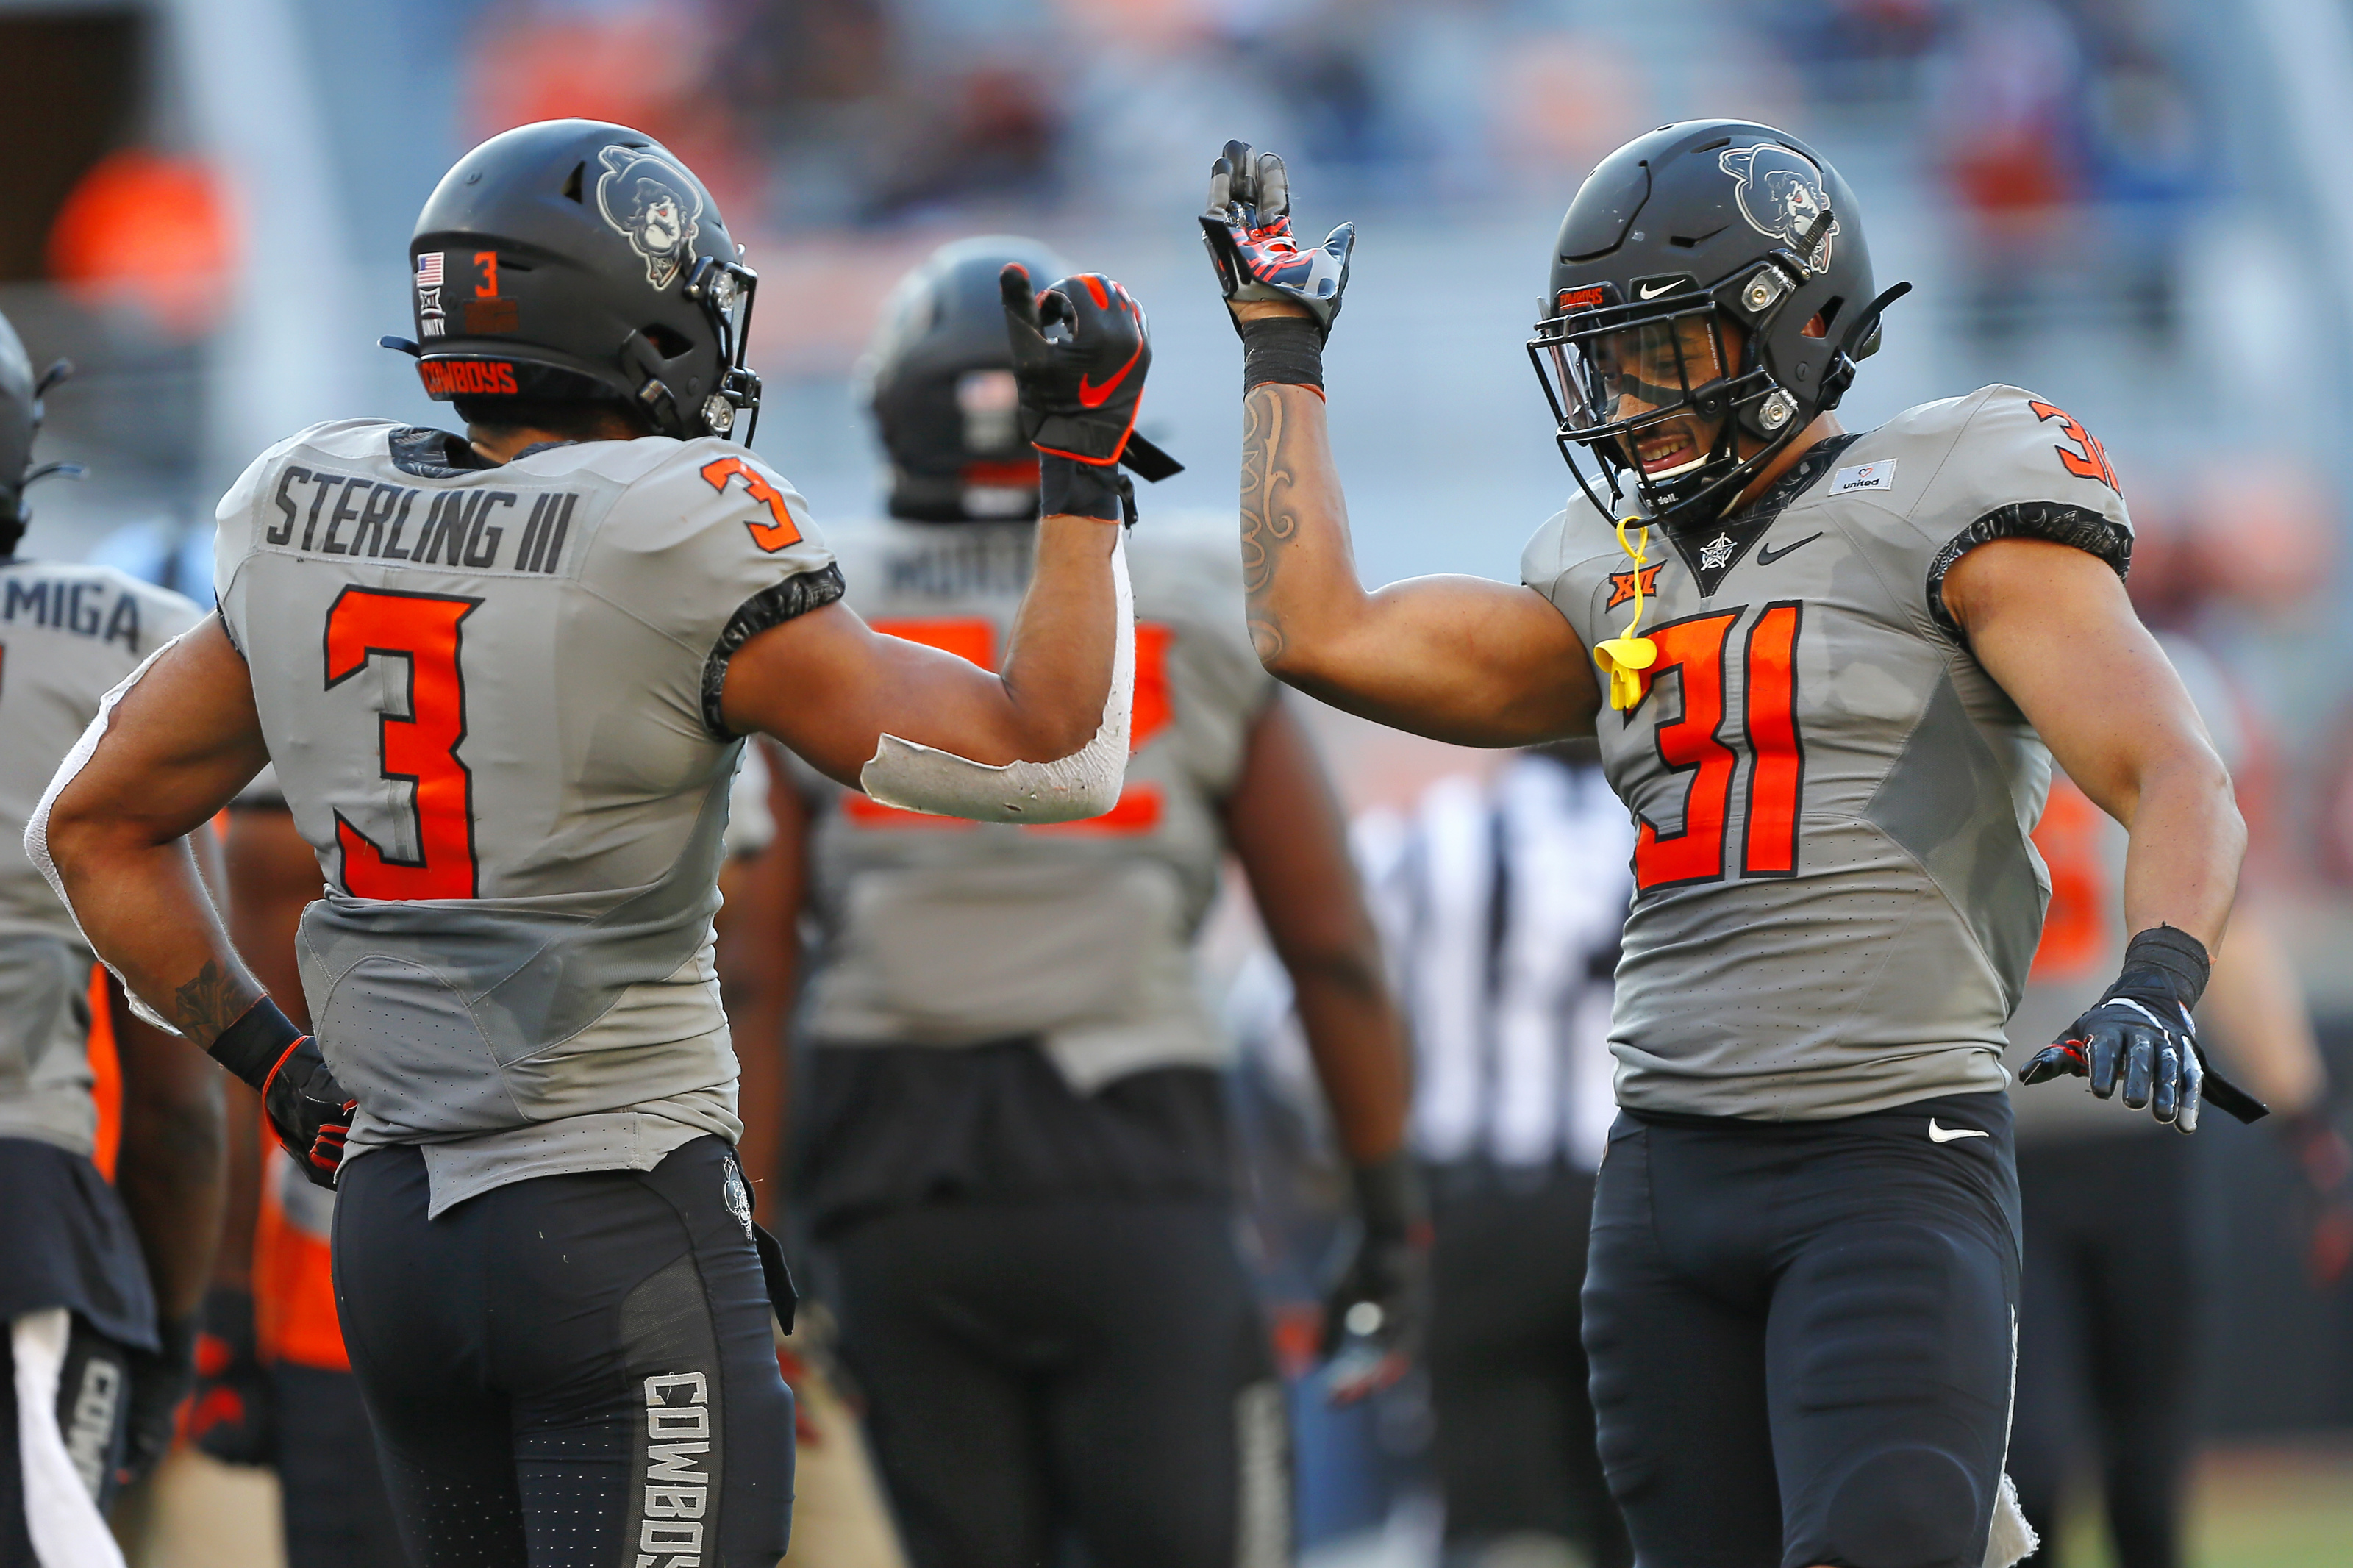 Oklahoma State football: Top 3 Prospects for 2022 NFL Draft